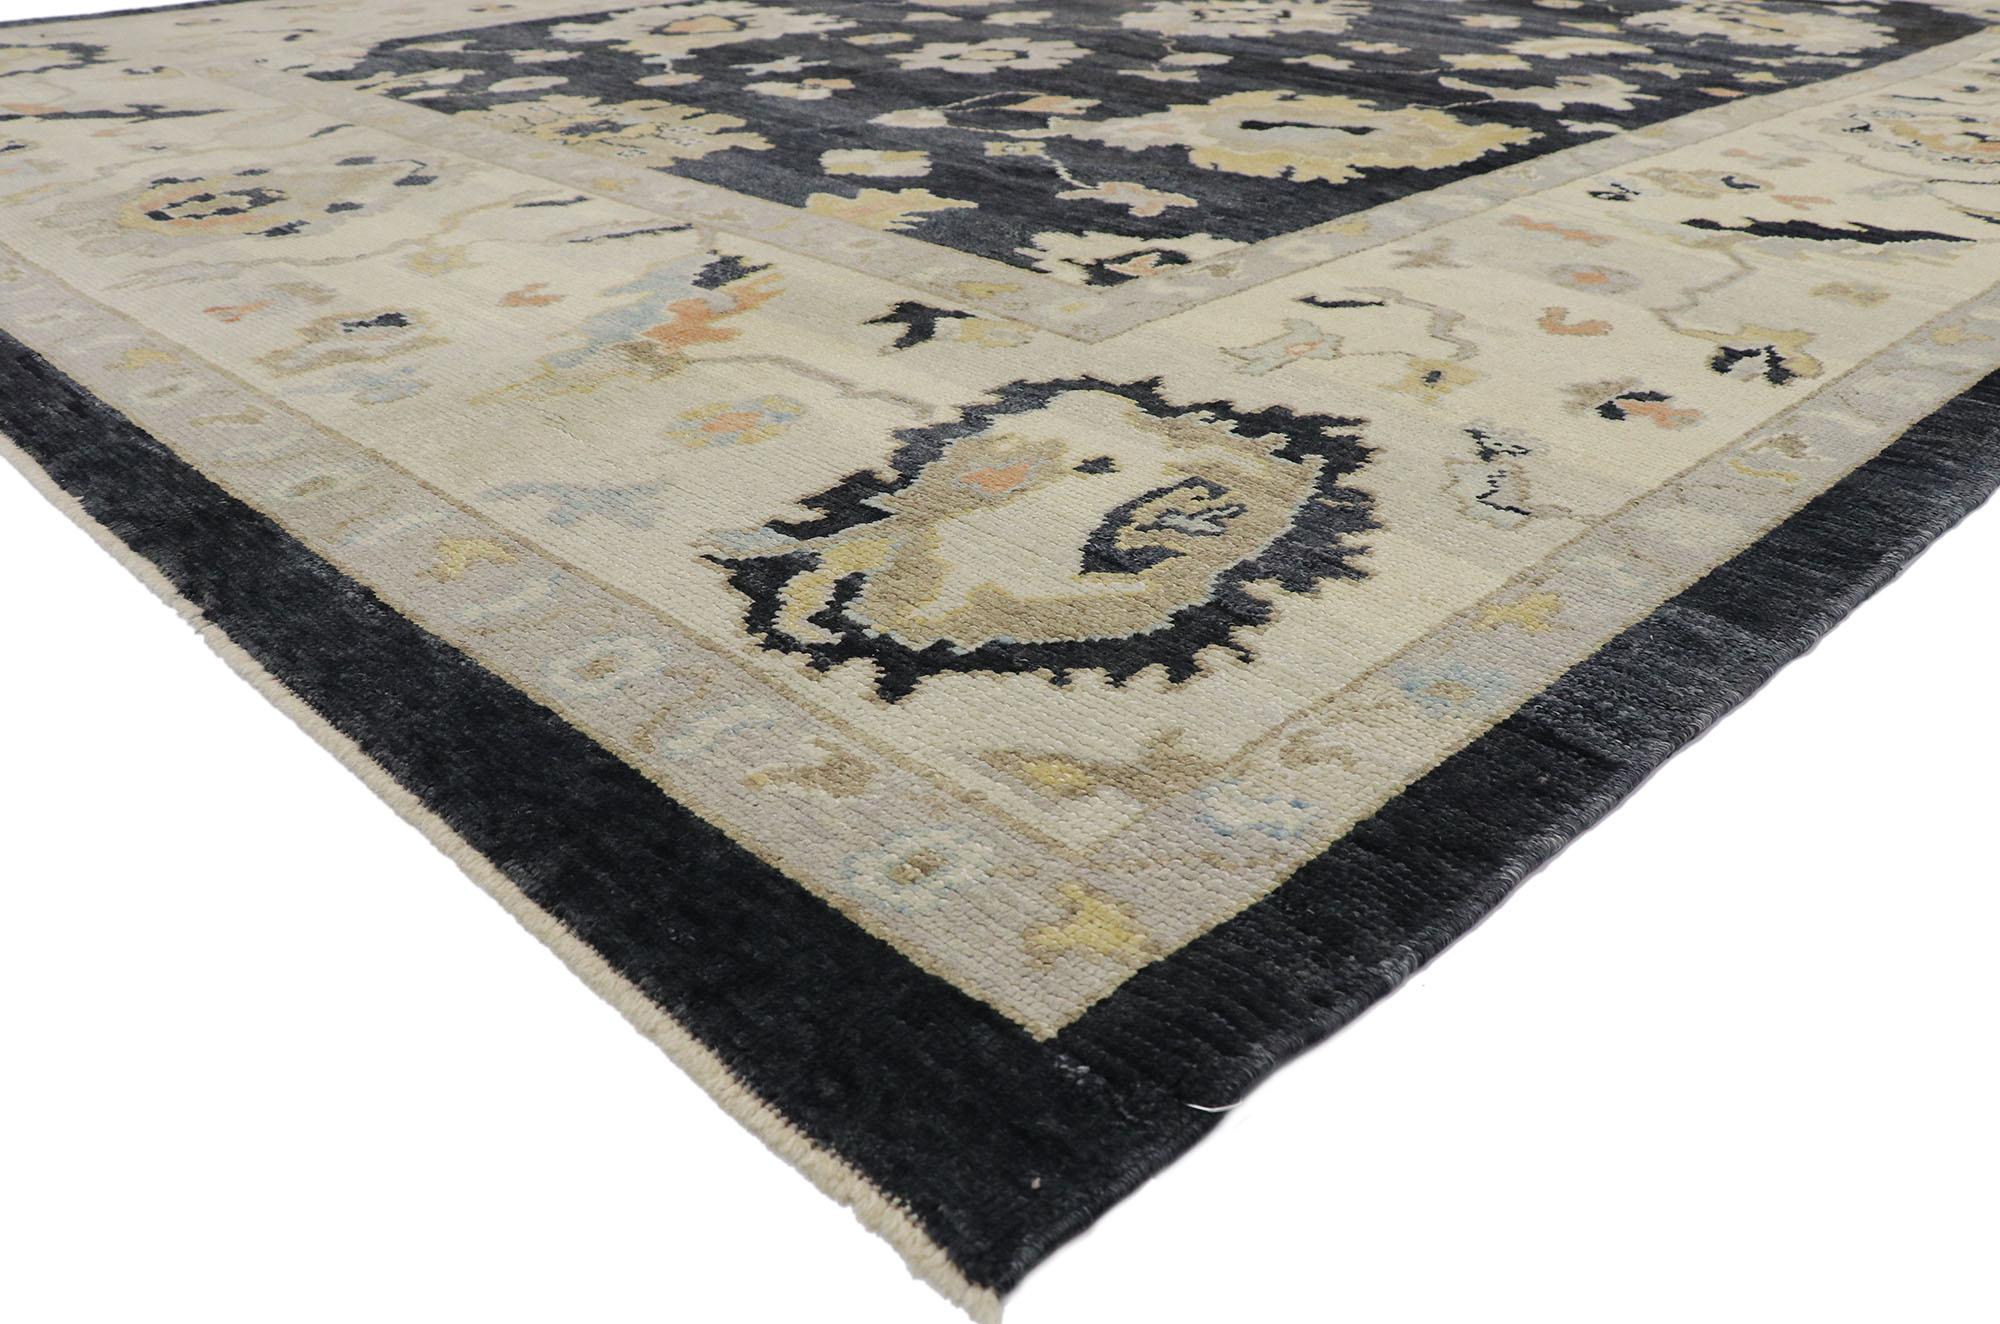 52737 new contemporary black Turkish Oushak rug with modern style 11'01 x 14'08. With its elegant sophistication and ornate detailing, this hand knotted wool contemporary Turkish Oushak rug is poised to impress. The abrashed black and charcoal gray